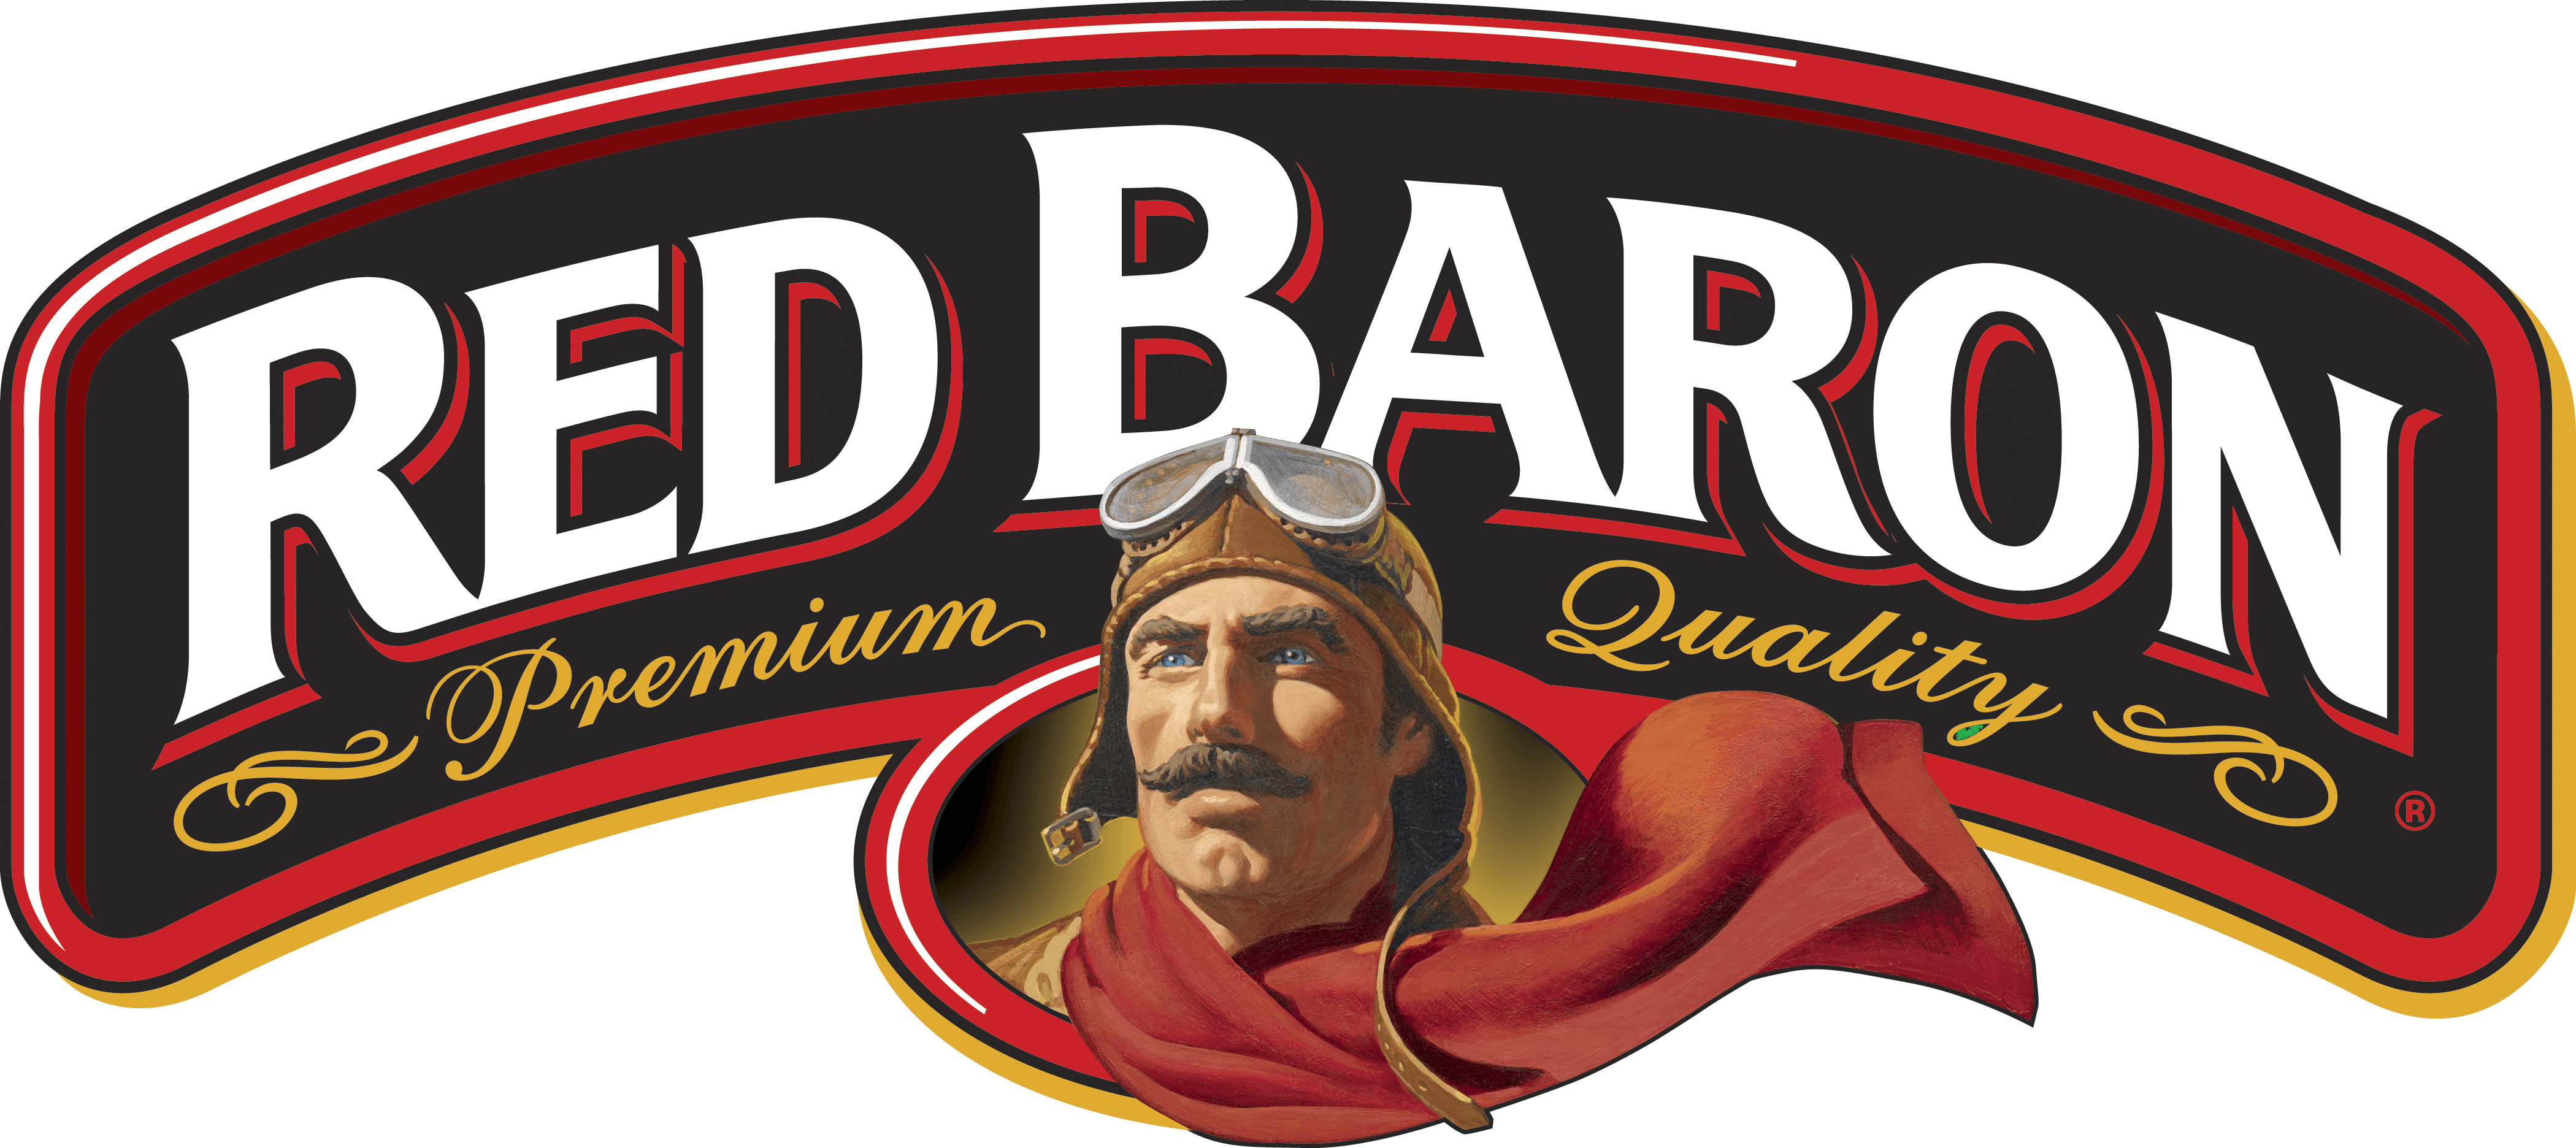 Red Pizza Logo - Red Baron